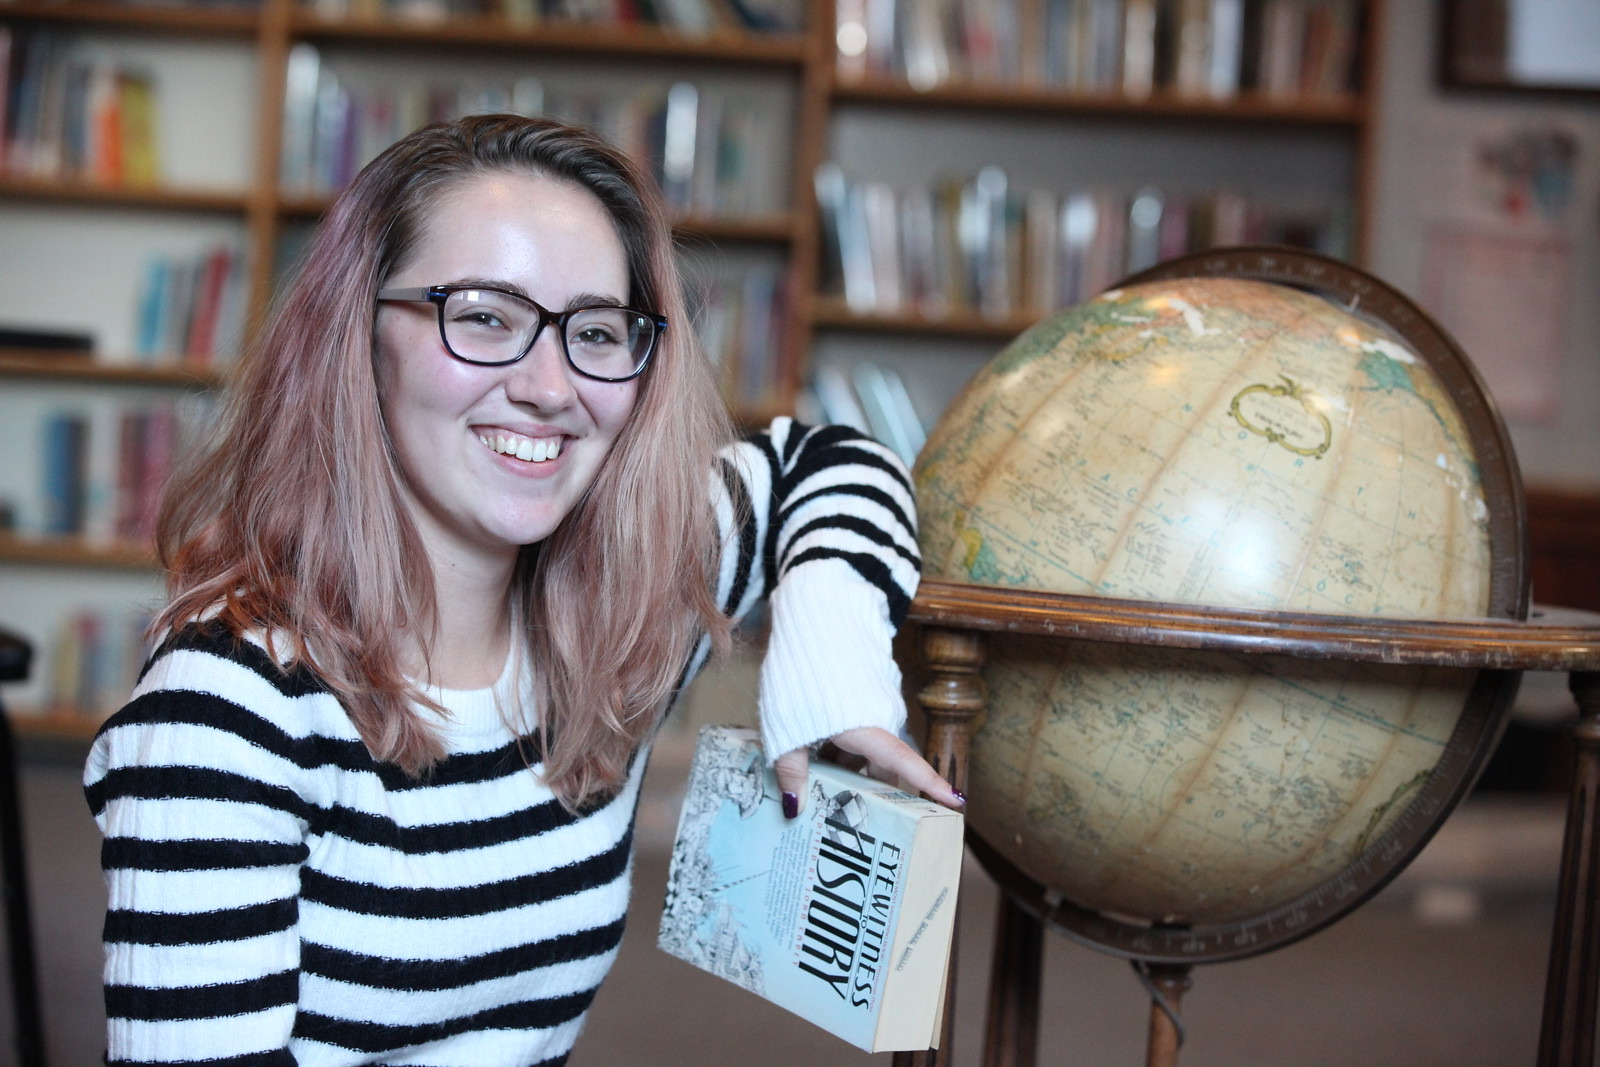 Woodward student poses with book and globe